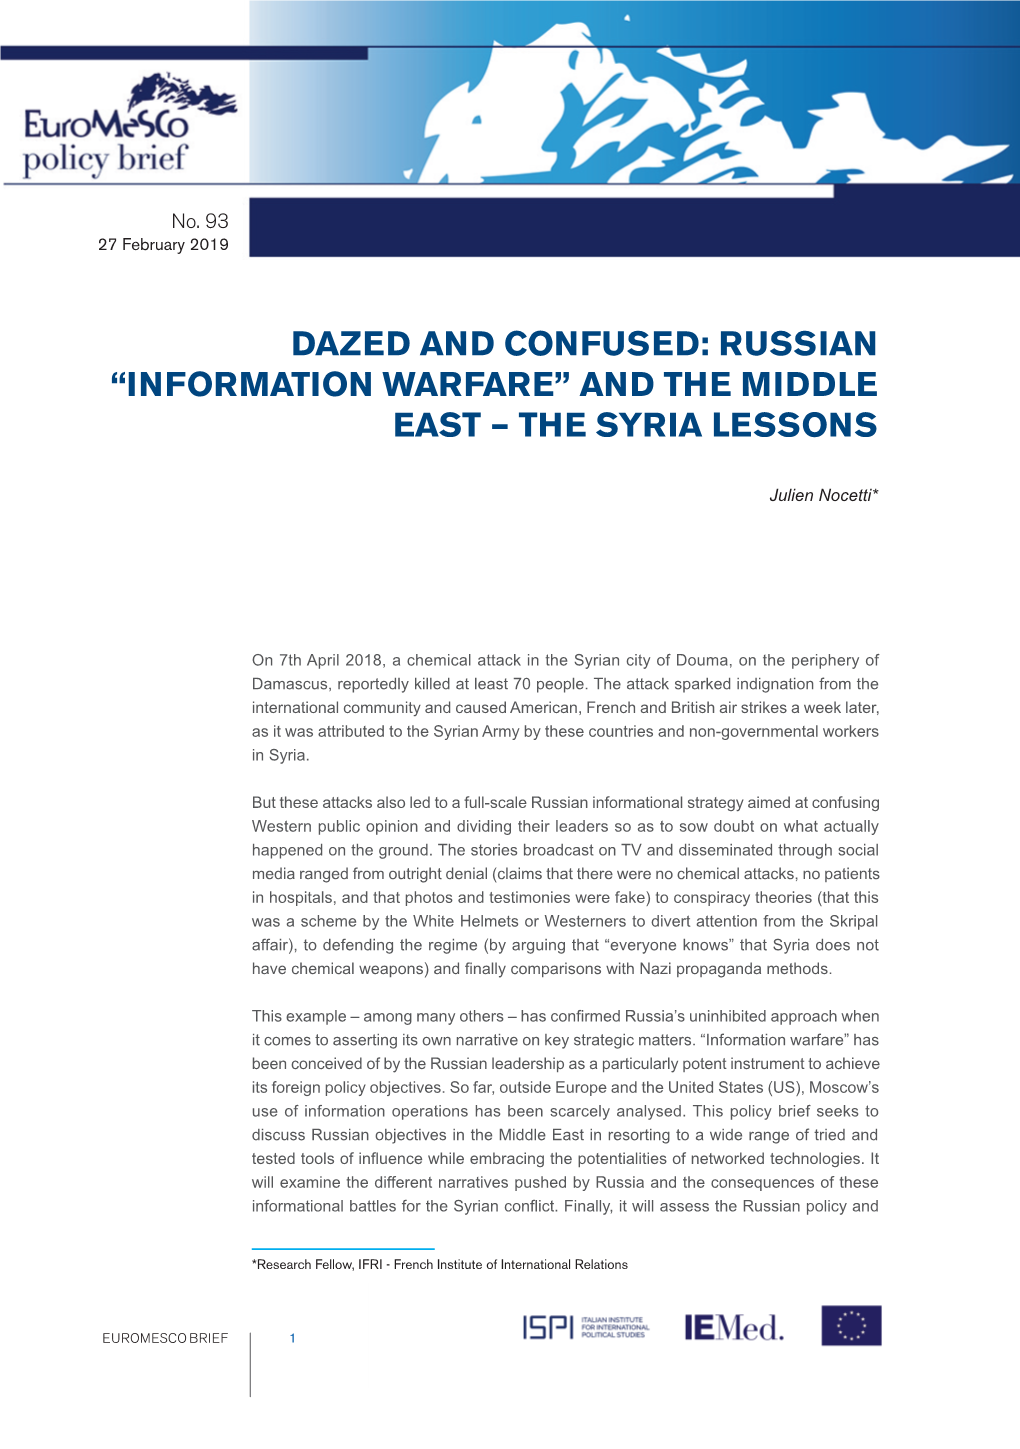 Dazed and Confused: Russian “Information Warfare” and the Middle East – the Syria Lessons